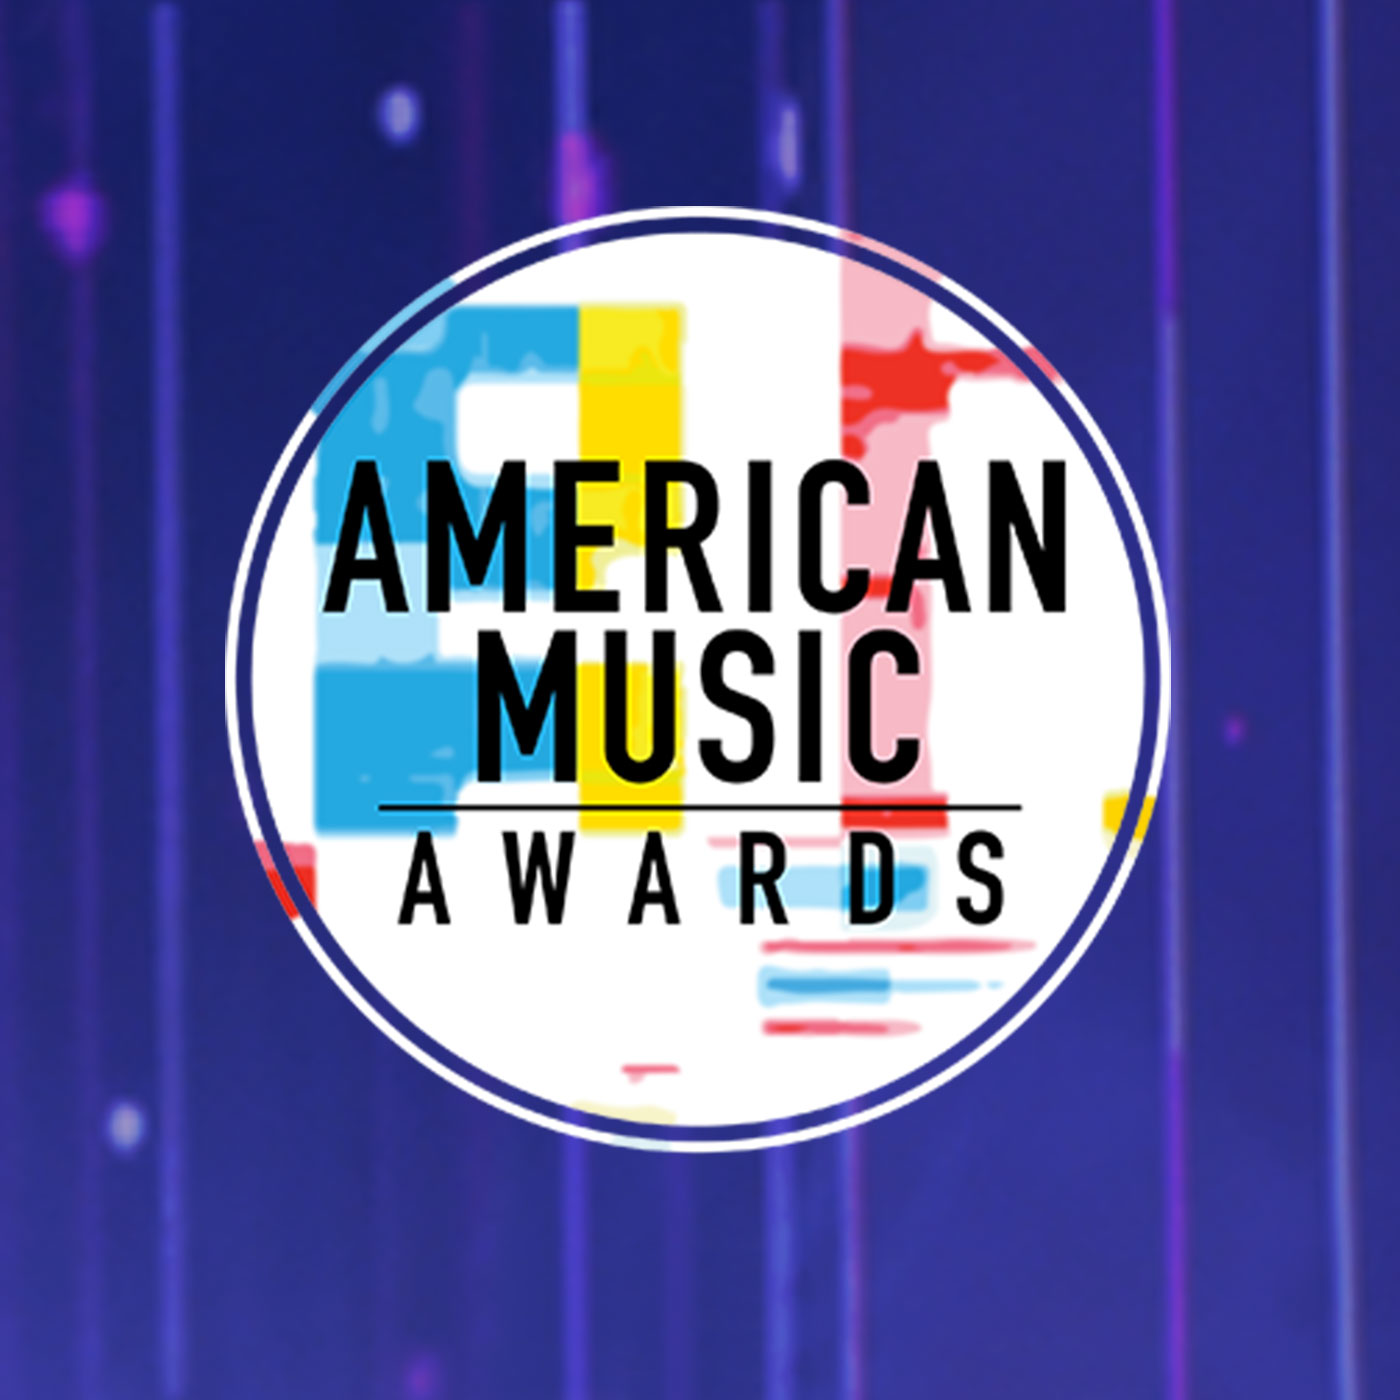 Behind The Scenes at the American Music Awards